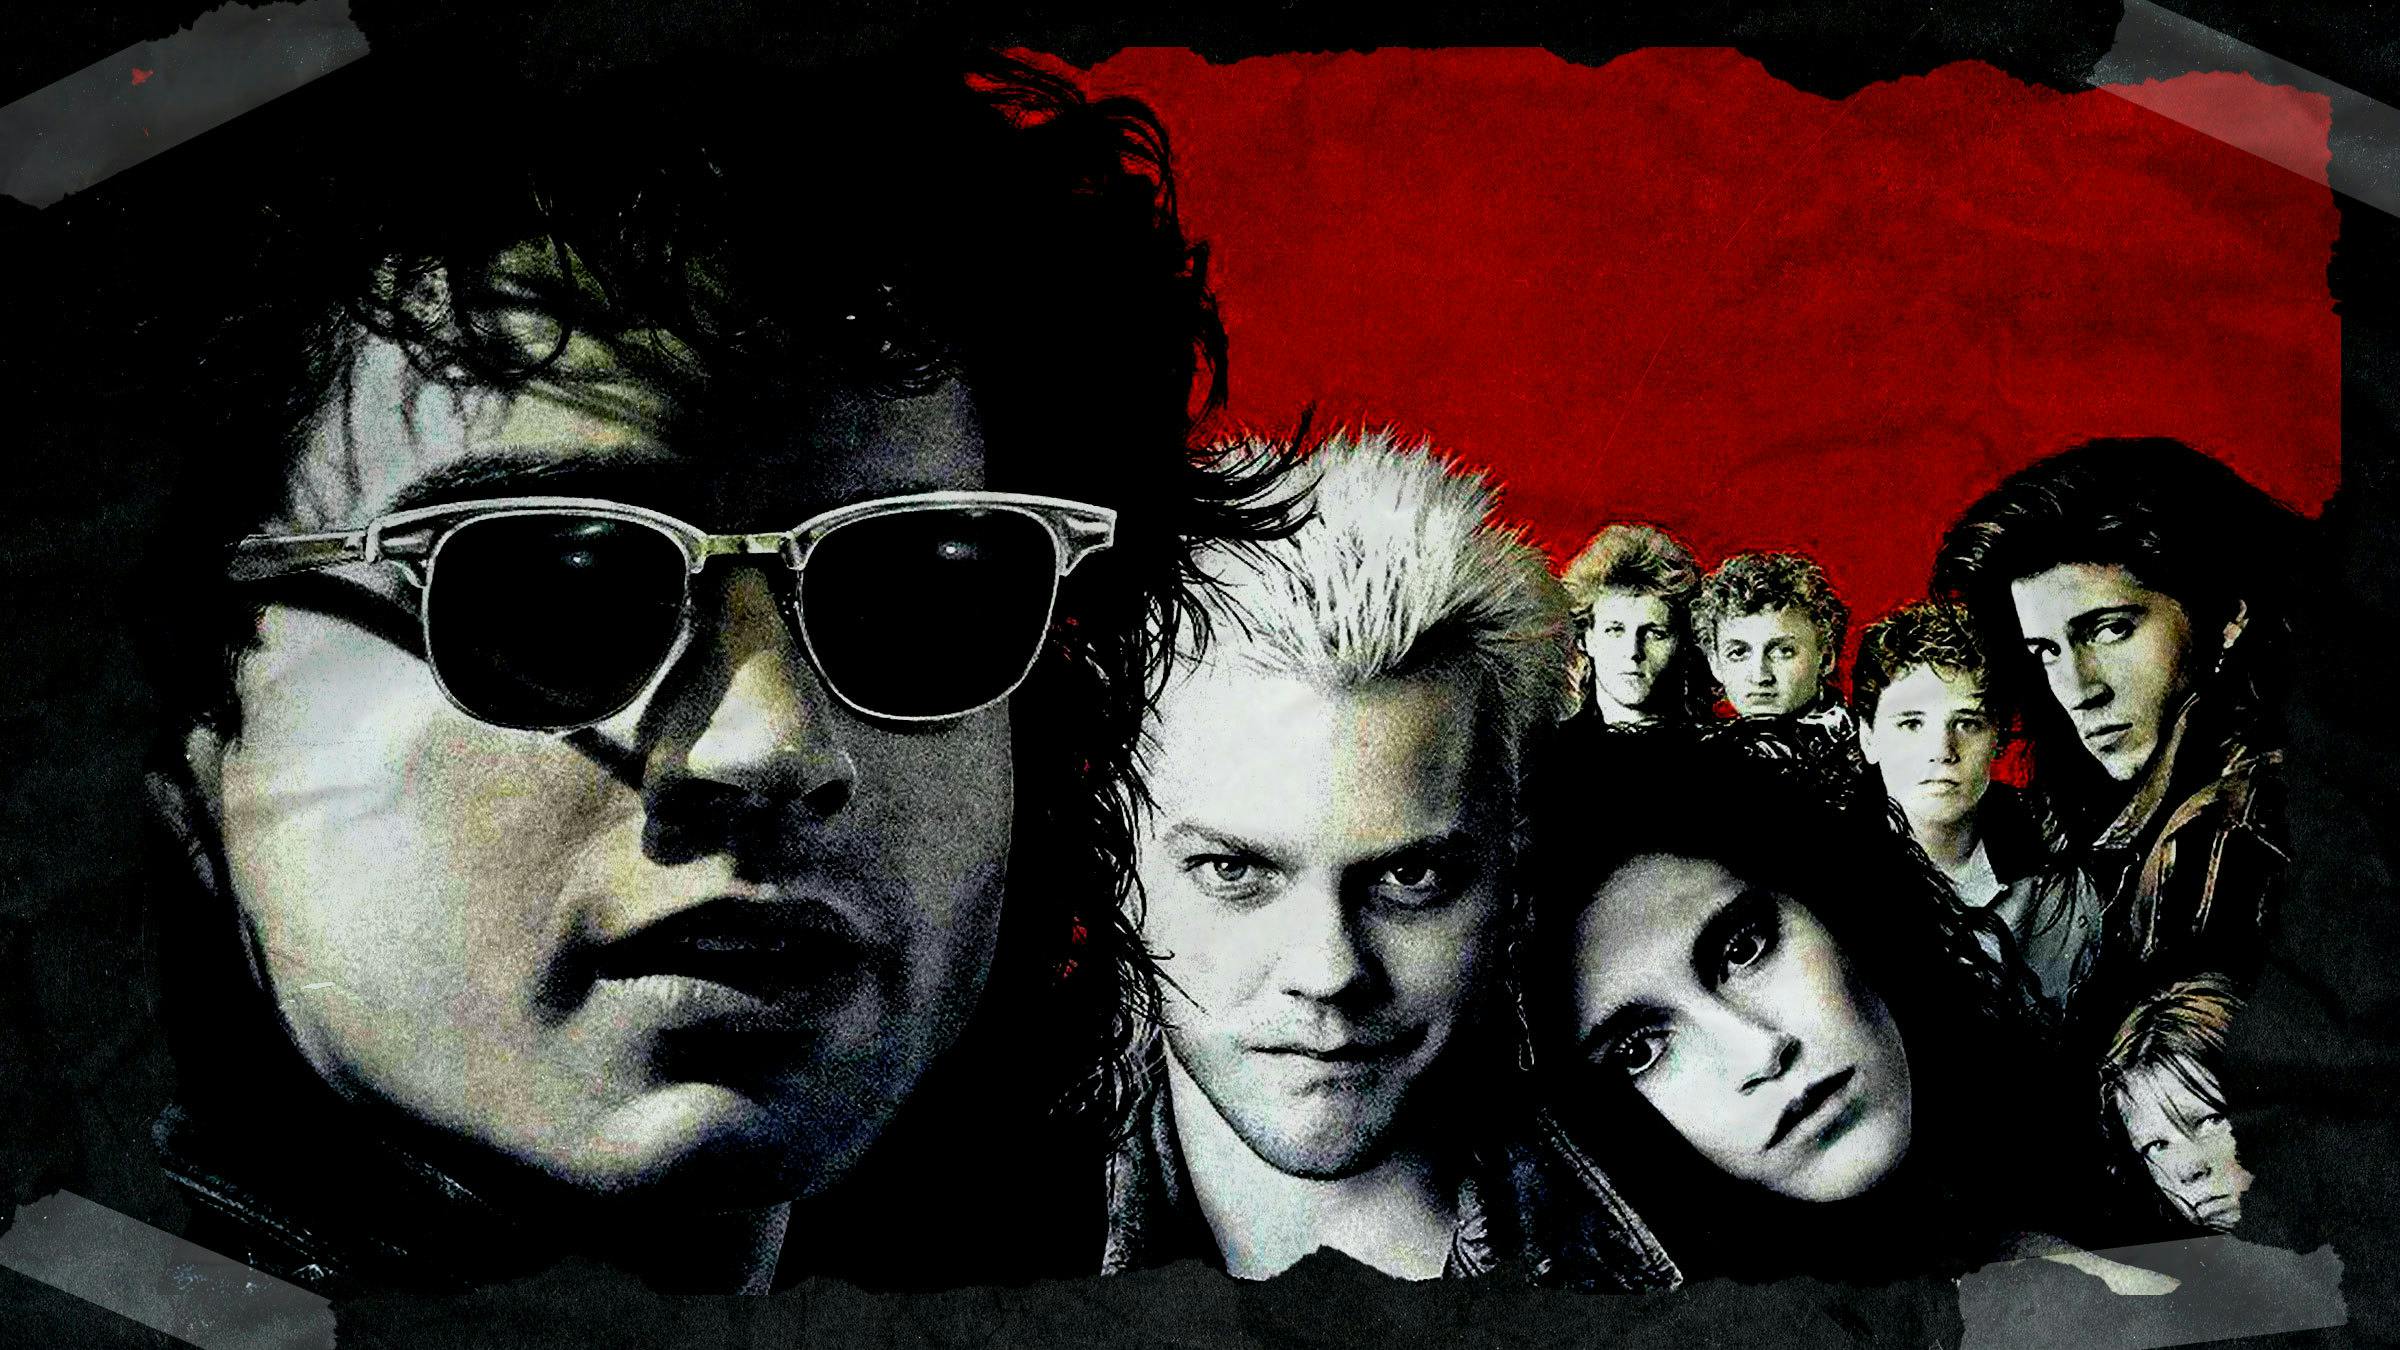 How The Lost Boys brought goth out of the shadows